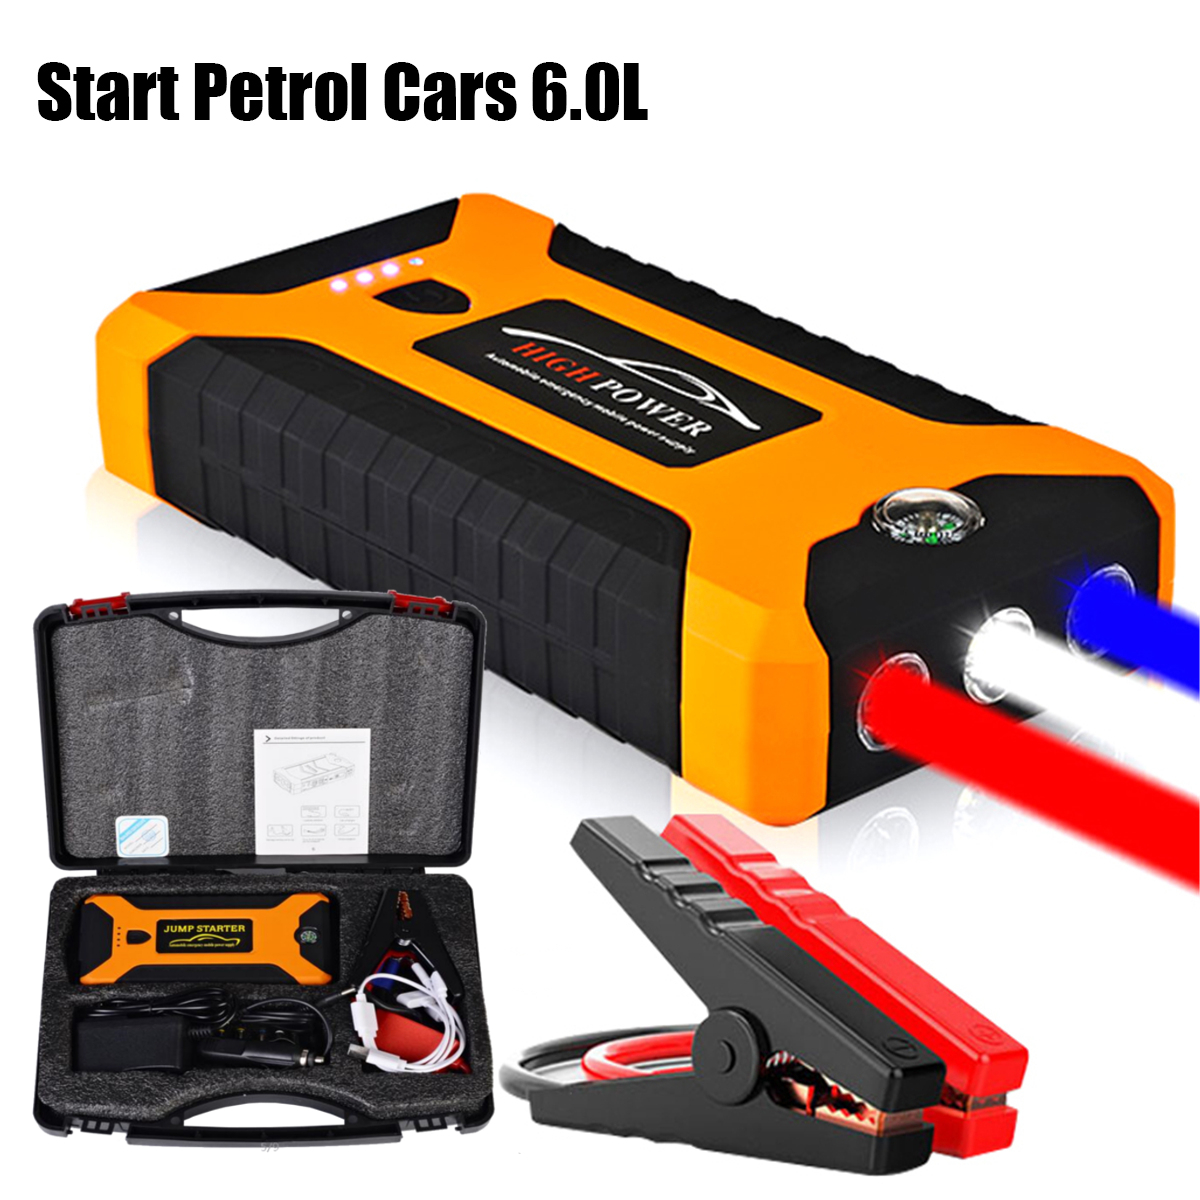 JX27-88000mAh-4USB-Car-Jump-Starter-Pack-Booster-Multifunction-Emergency-Power-Supply-Starter-Charge-1381251-10